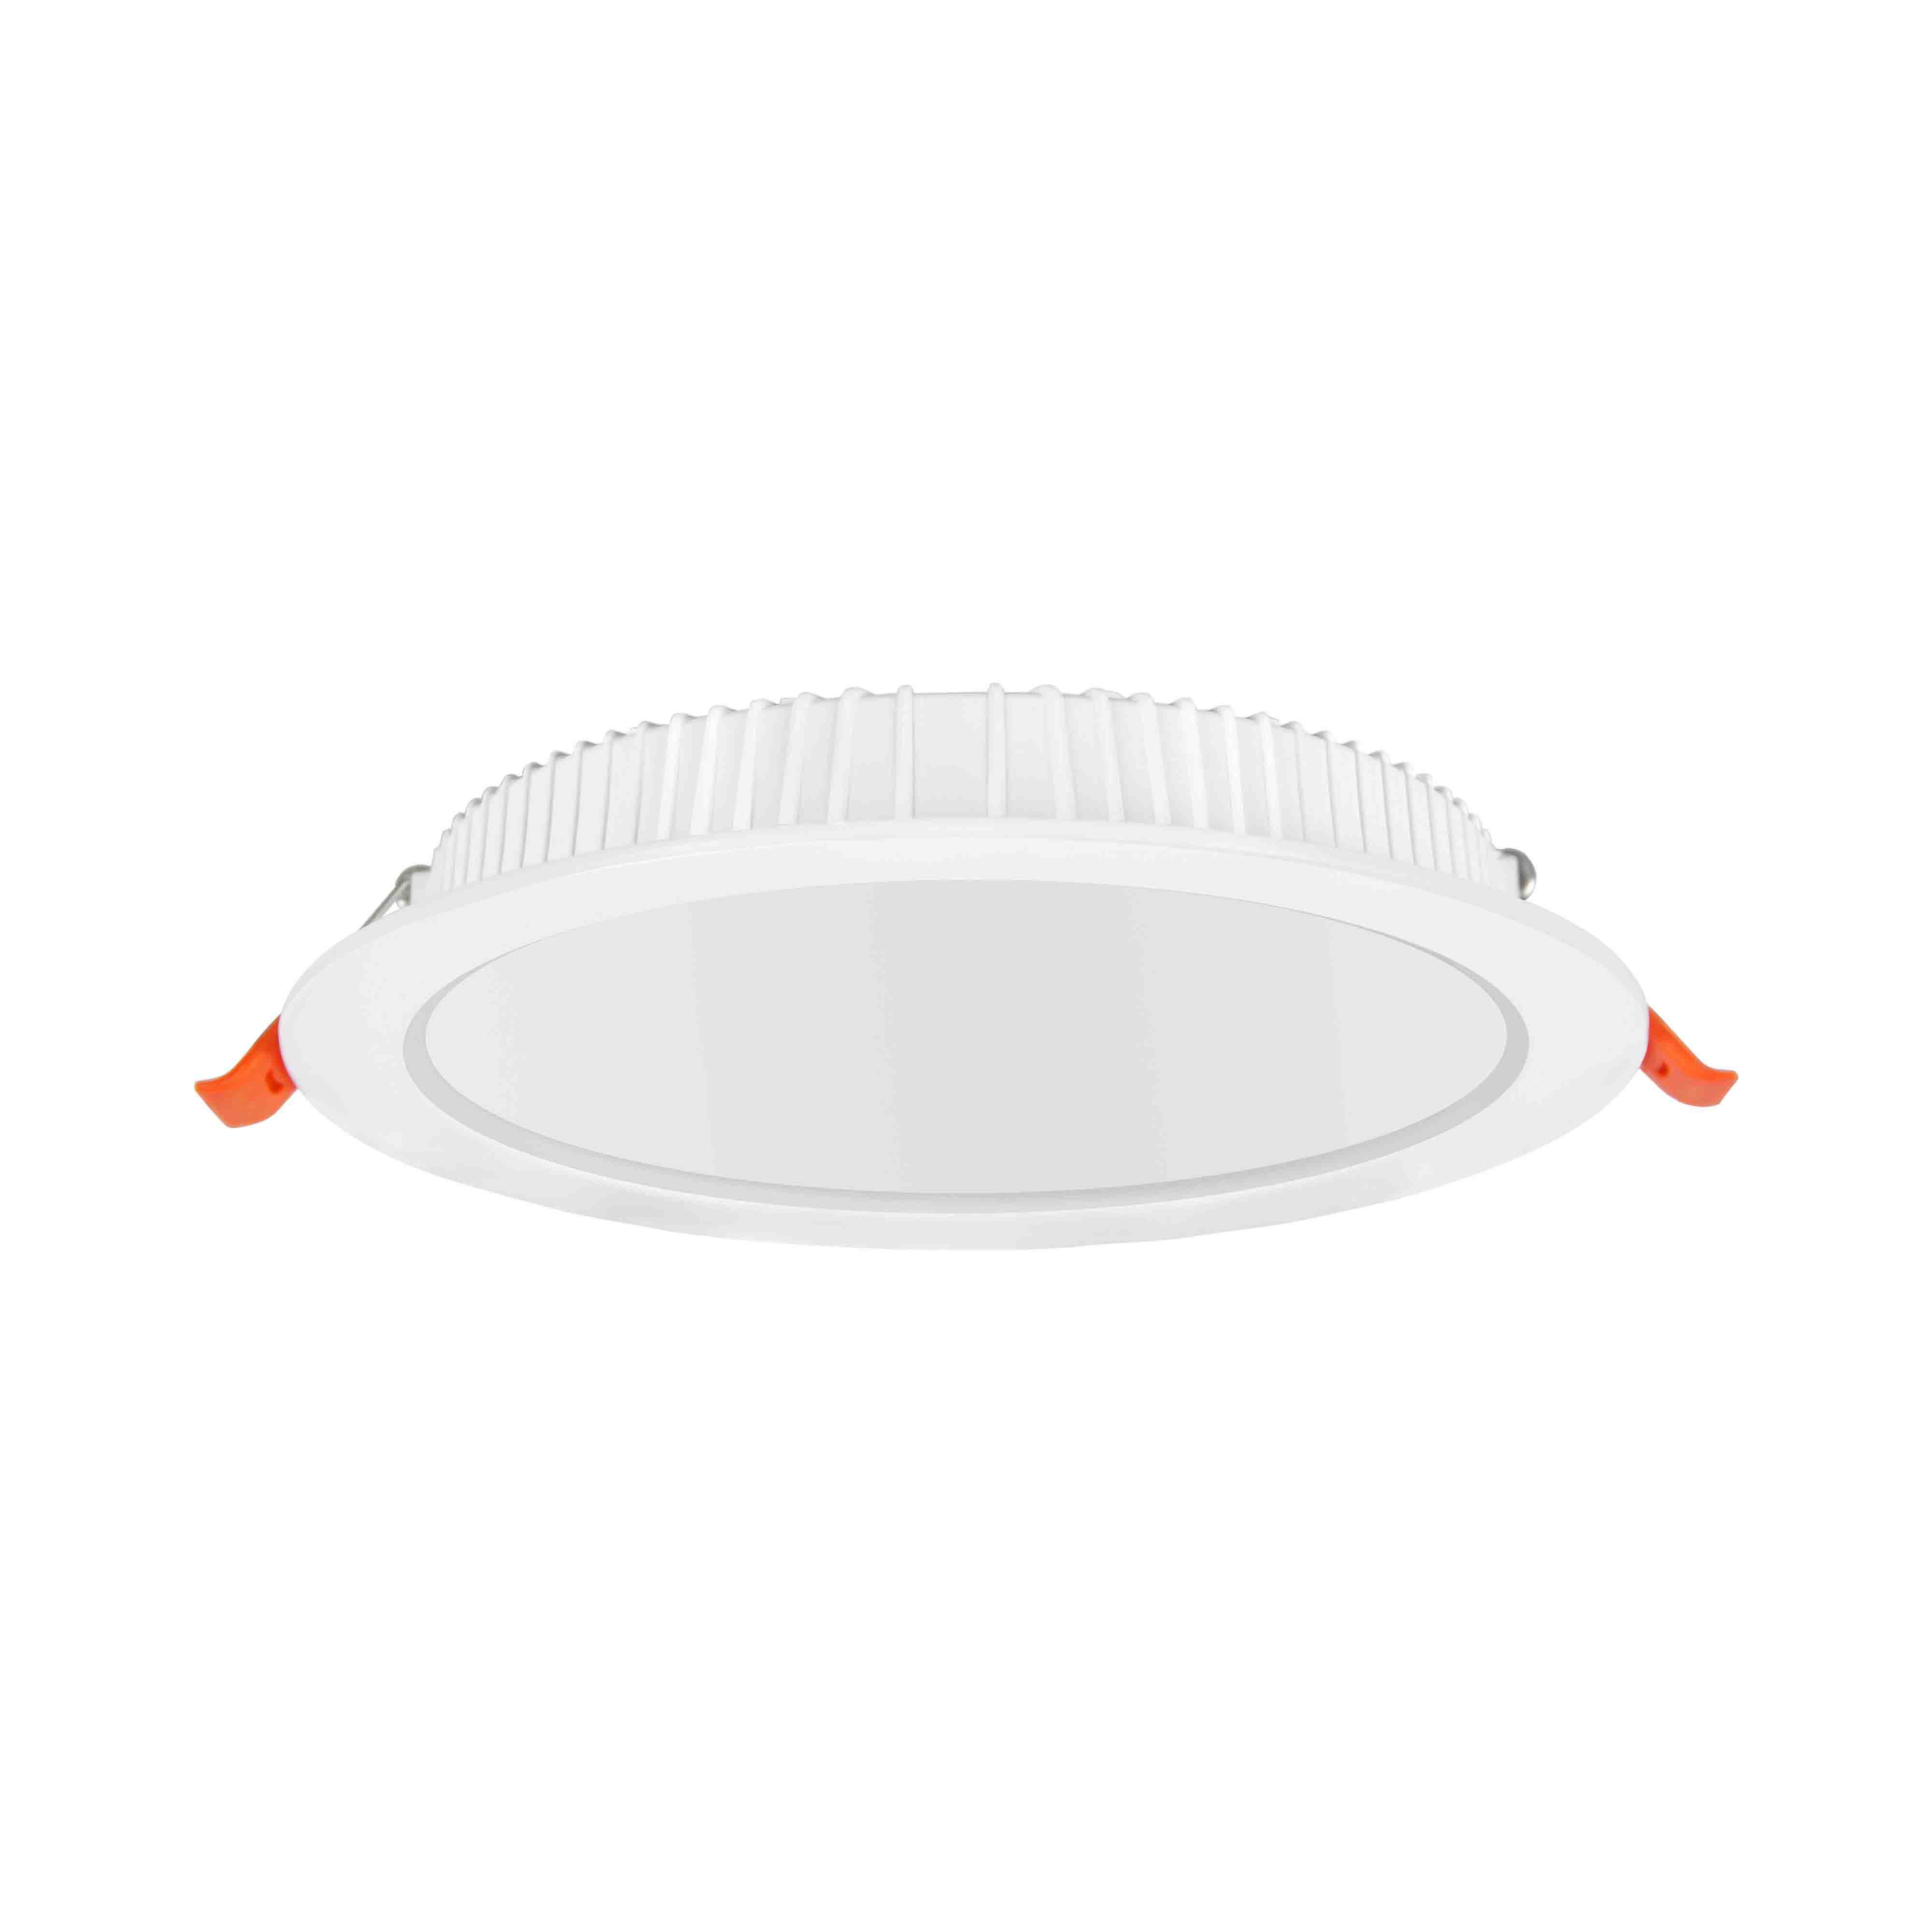 What is recessed lighting?